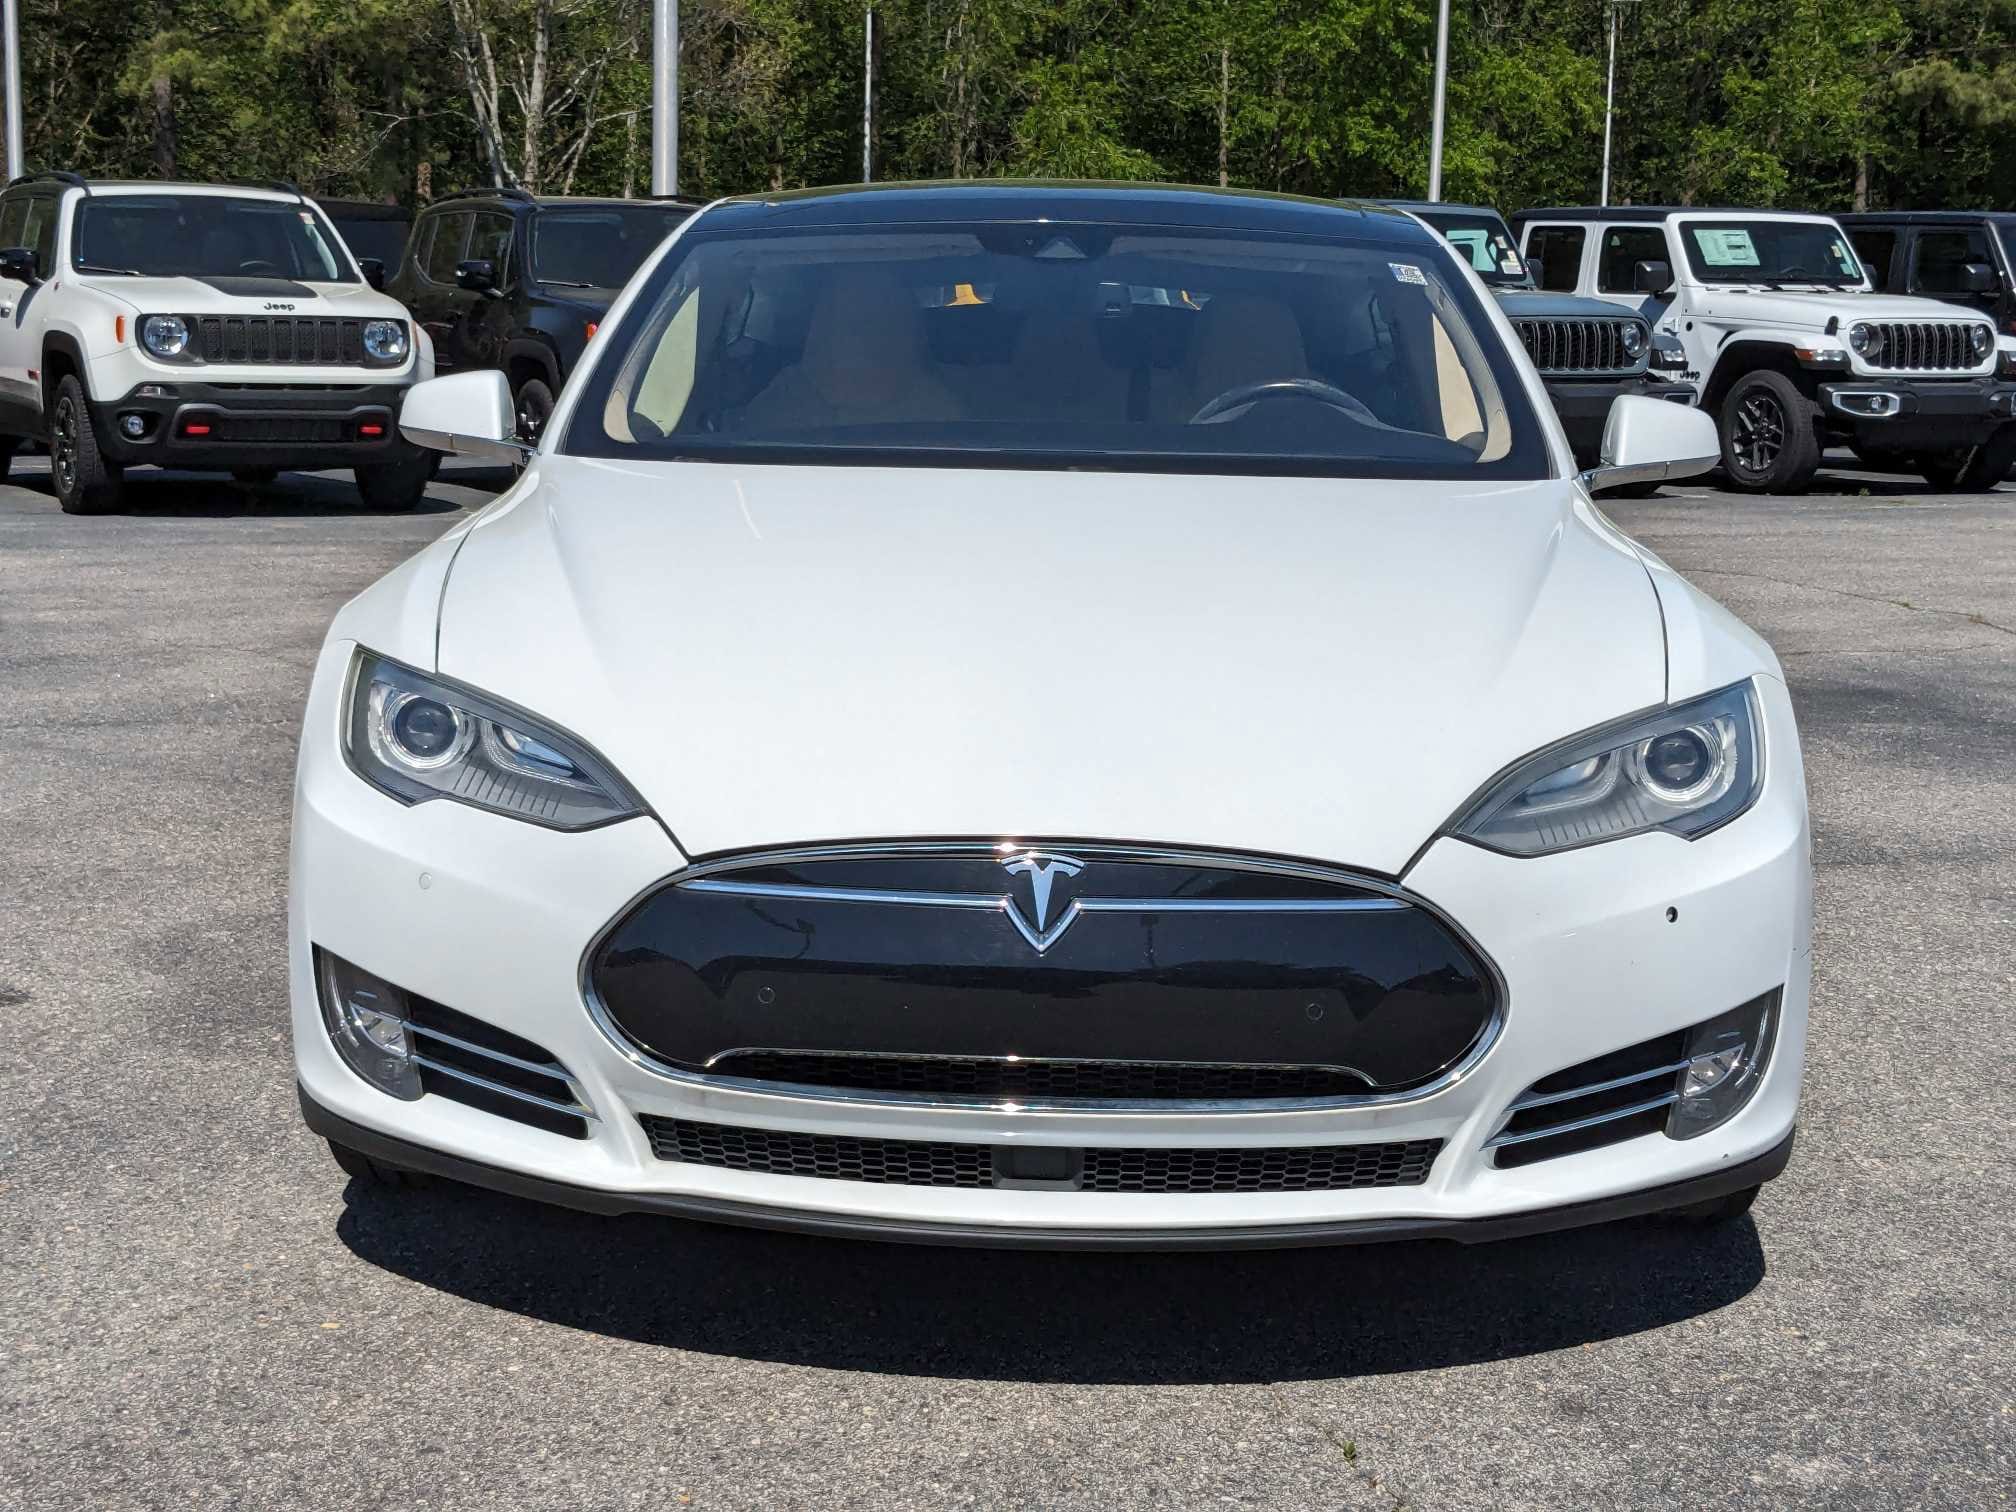 Used 2014 Tesla Model S S with VIN 5YJSA1H19EFP65239 for sale in Cary, NC